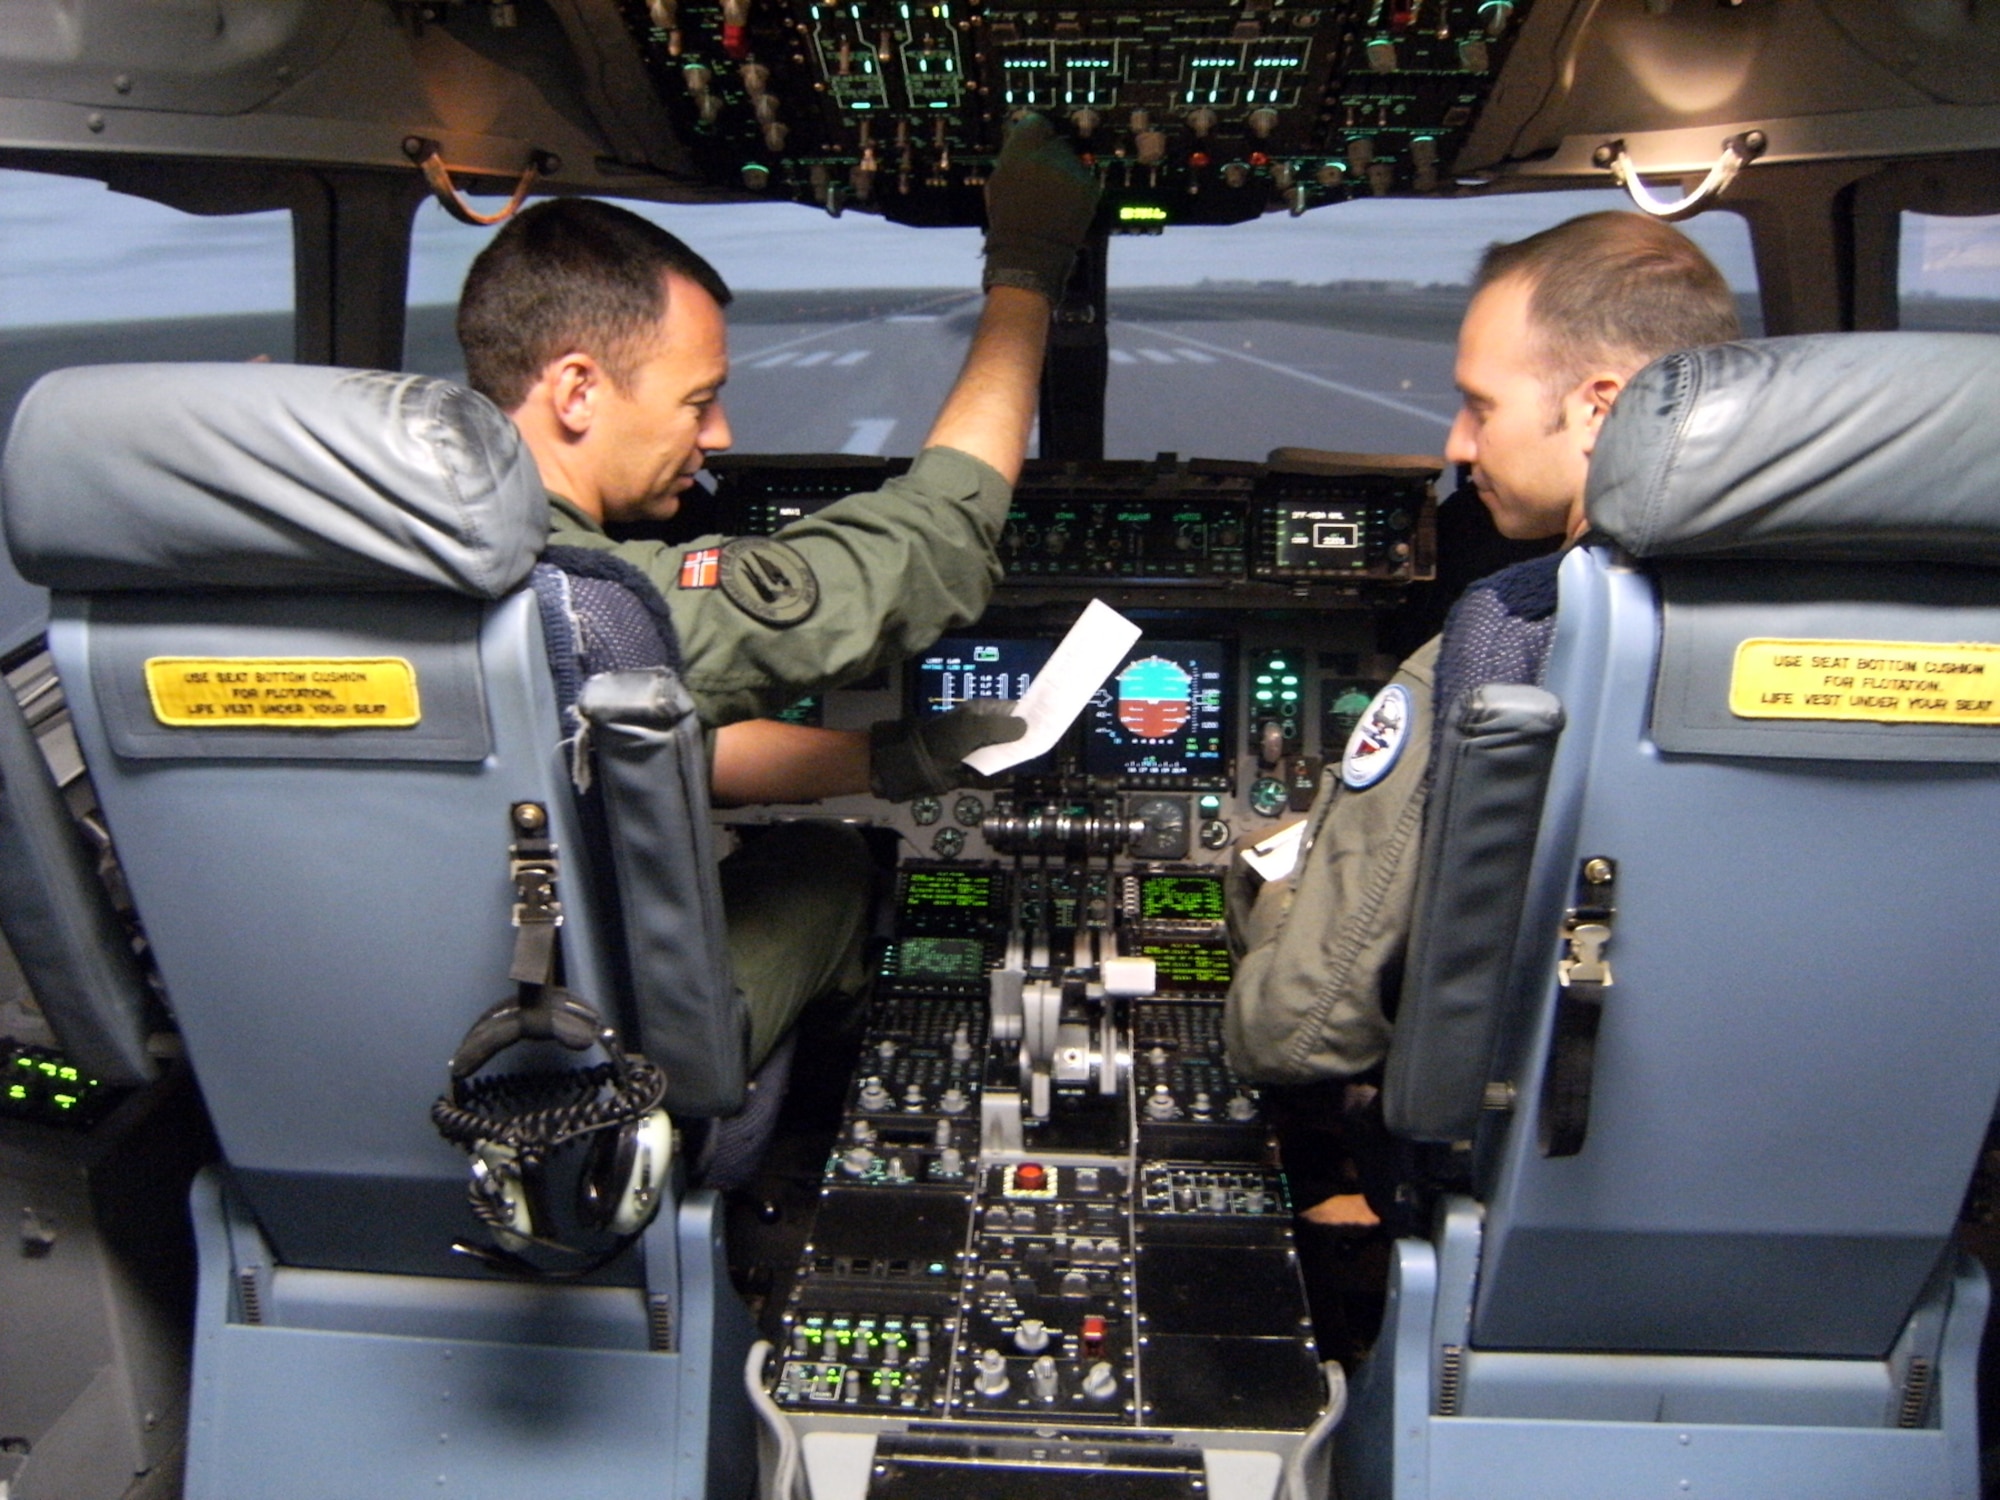 ALTUS AIR FORCE BASE, Okla. -- Maj. Christian Langfeldt (left) and Capt. Oeyvind Haaheim, Norwegian Air Force pilots, perform a pre-flight check before takeoff in a C-17 simulator at the C-17 Aircrew Training Center while enrolled in a C-17 pilot training course April 16. Major Langfeldt and and Captain Haaheim will fly airlift missions at the Strategic Airlift Capability Heavy Airlift Wing at Papa Air Base, Hungary, after they graduate from the course in June. The HAW is composed of a multi-national force involving 10 North Atlantic Treaty Organization country and two partnership for peace nations. (U.S. Air Force photo by Senior Airman Clinton Atkins)